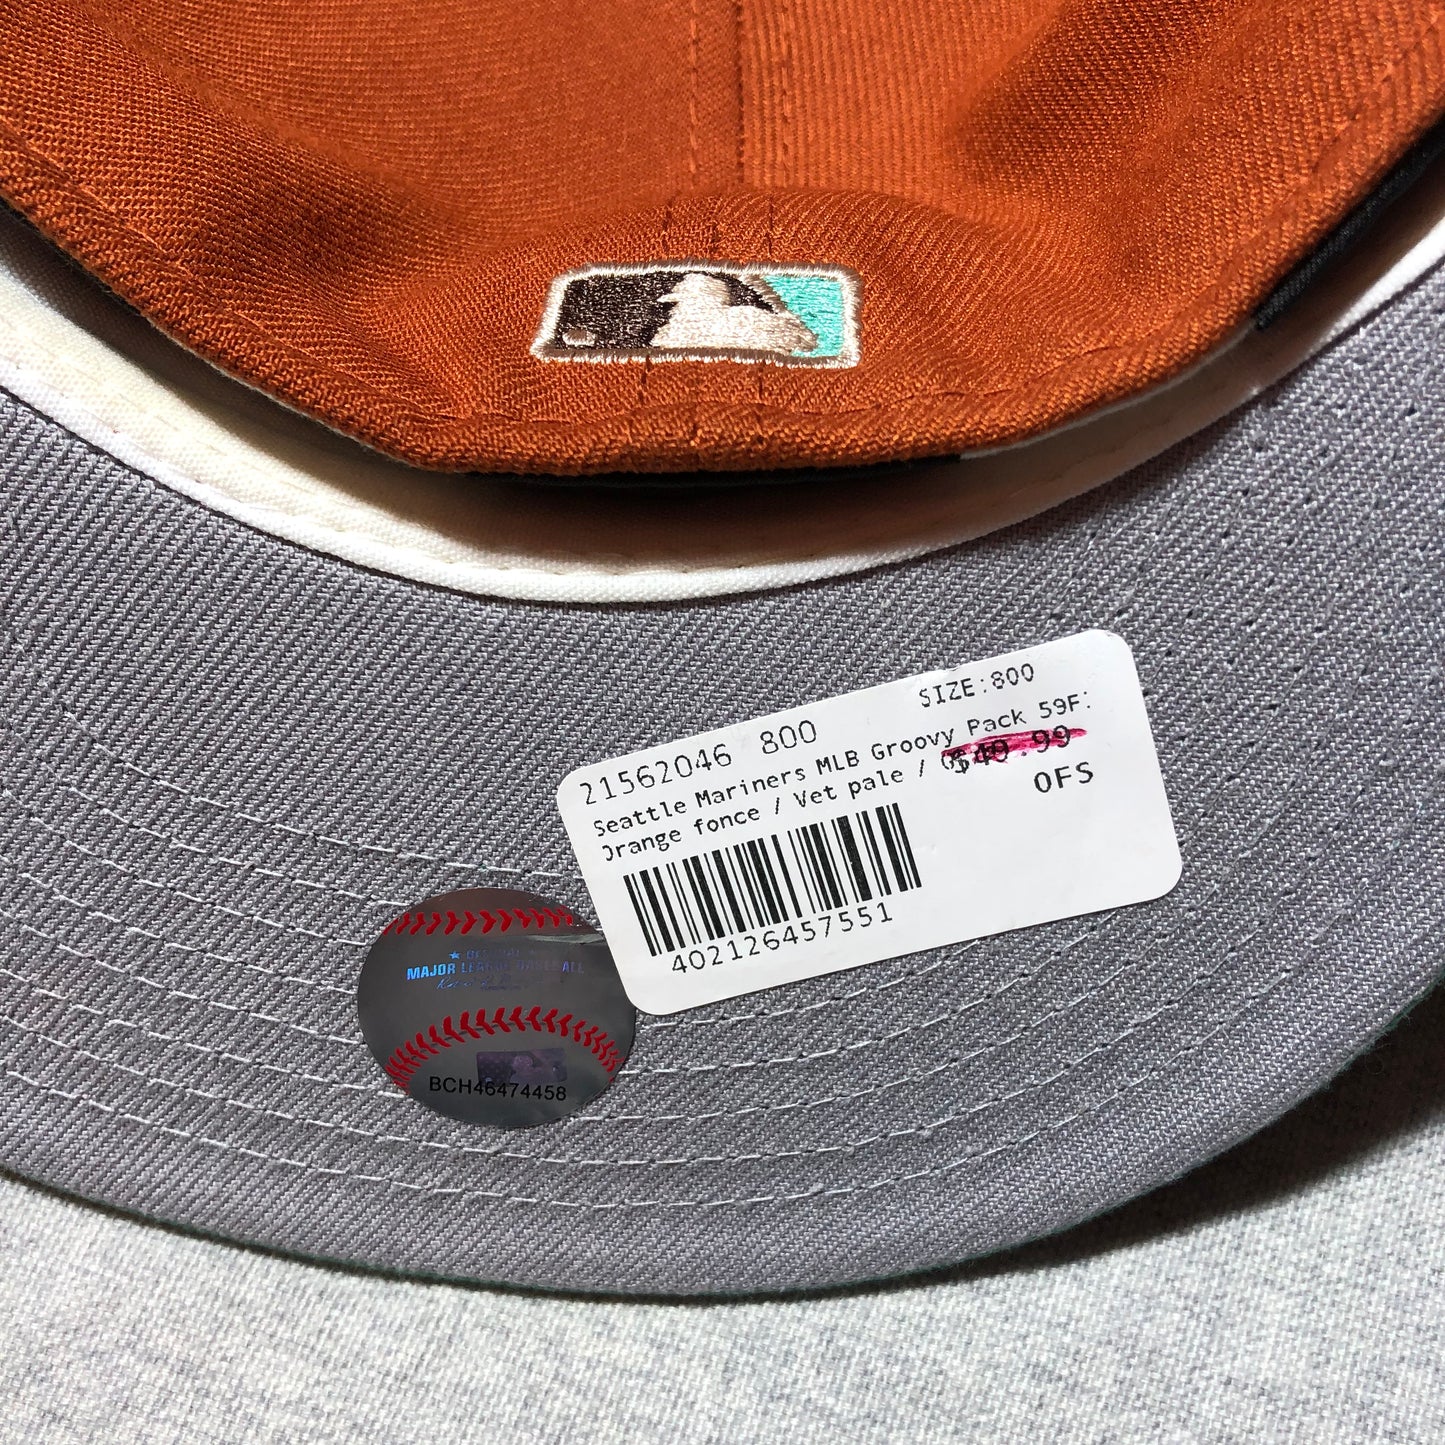 Seattle Mariners Hat MLB Groovy 59FIFTY Size 8 Lids Burnt Orange All Star Patch NEW